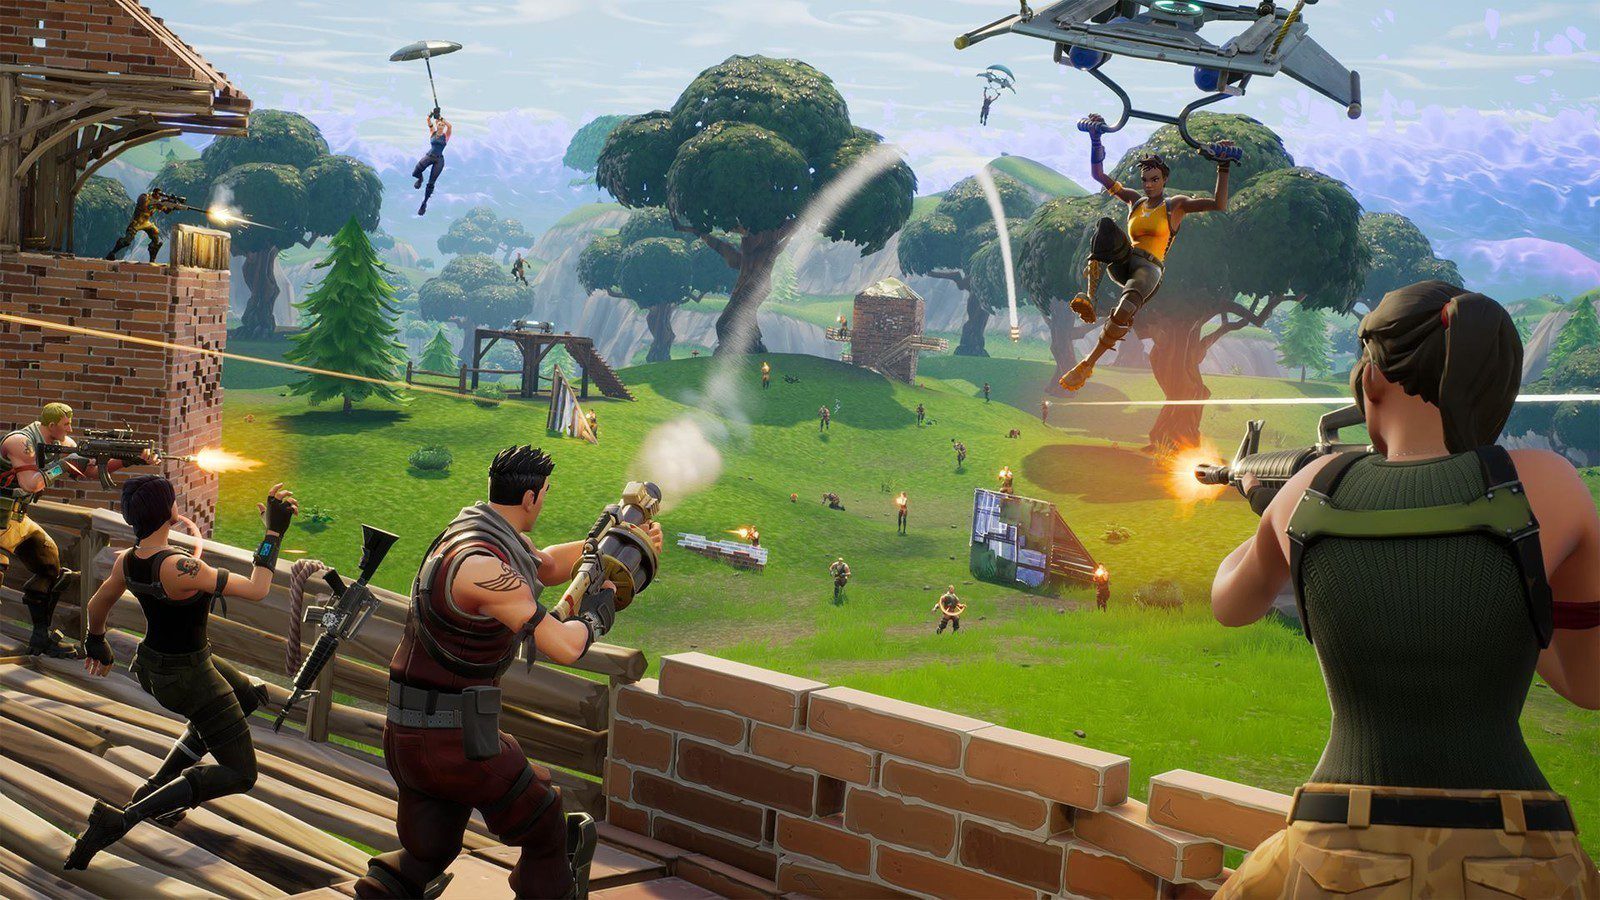 fortnite likely coming to apple tv as tvos reference found in game code u - can i play fortnite on a macbook air